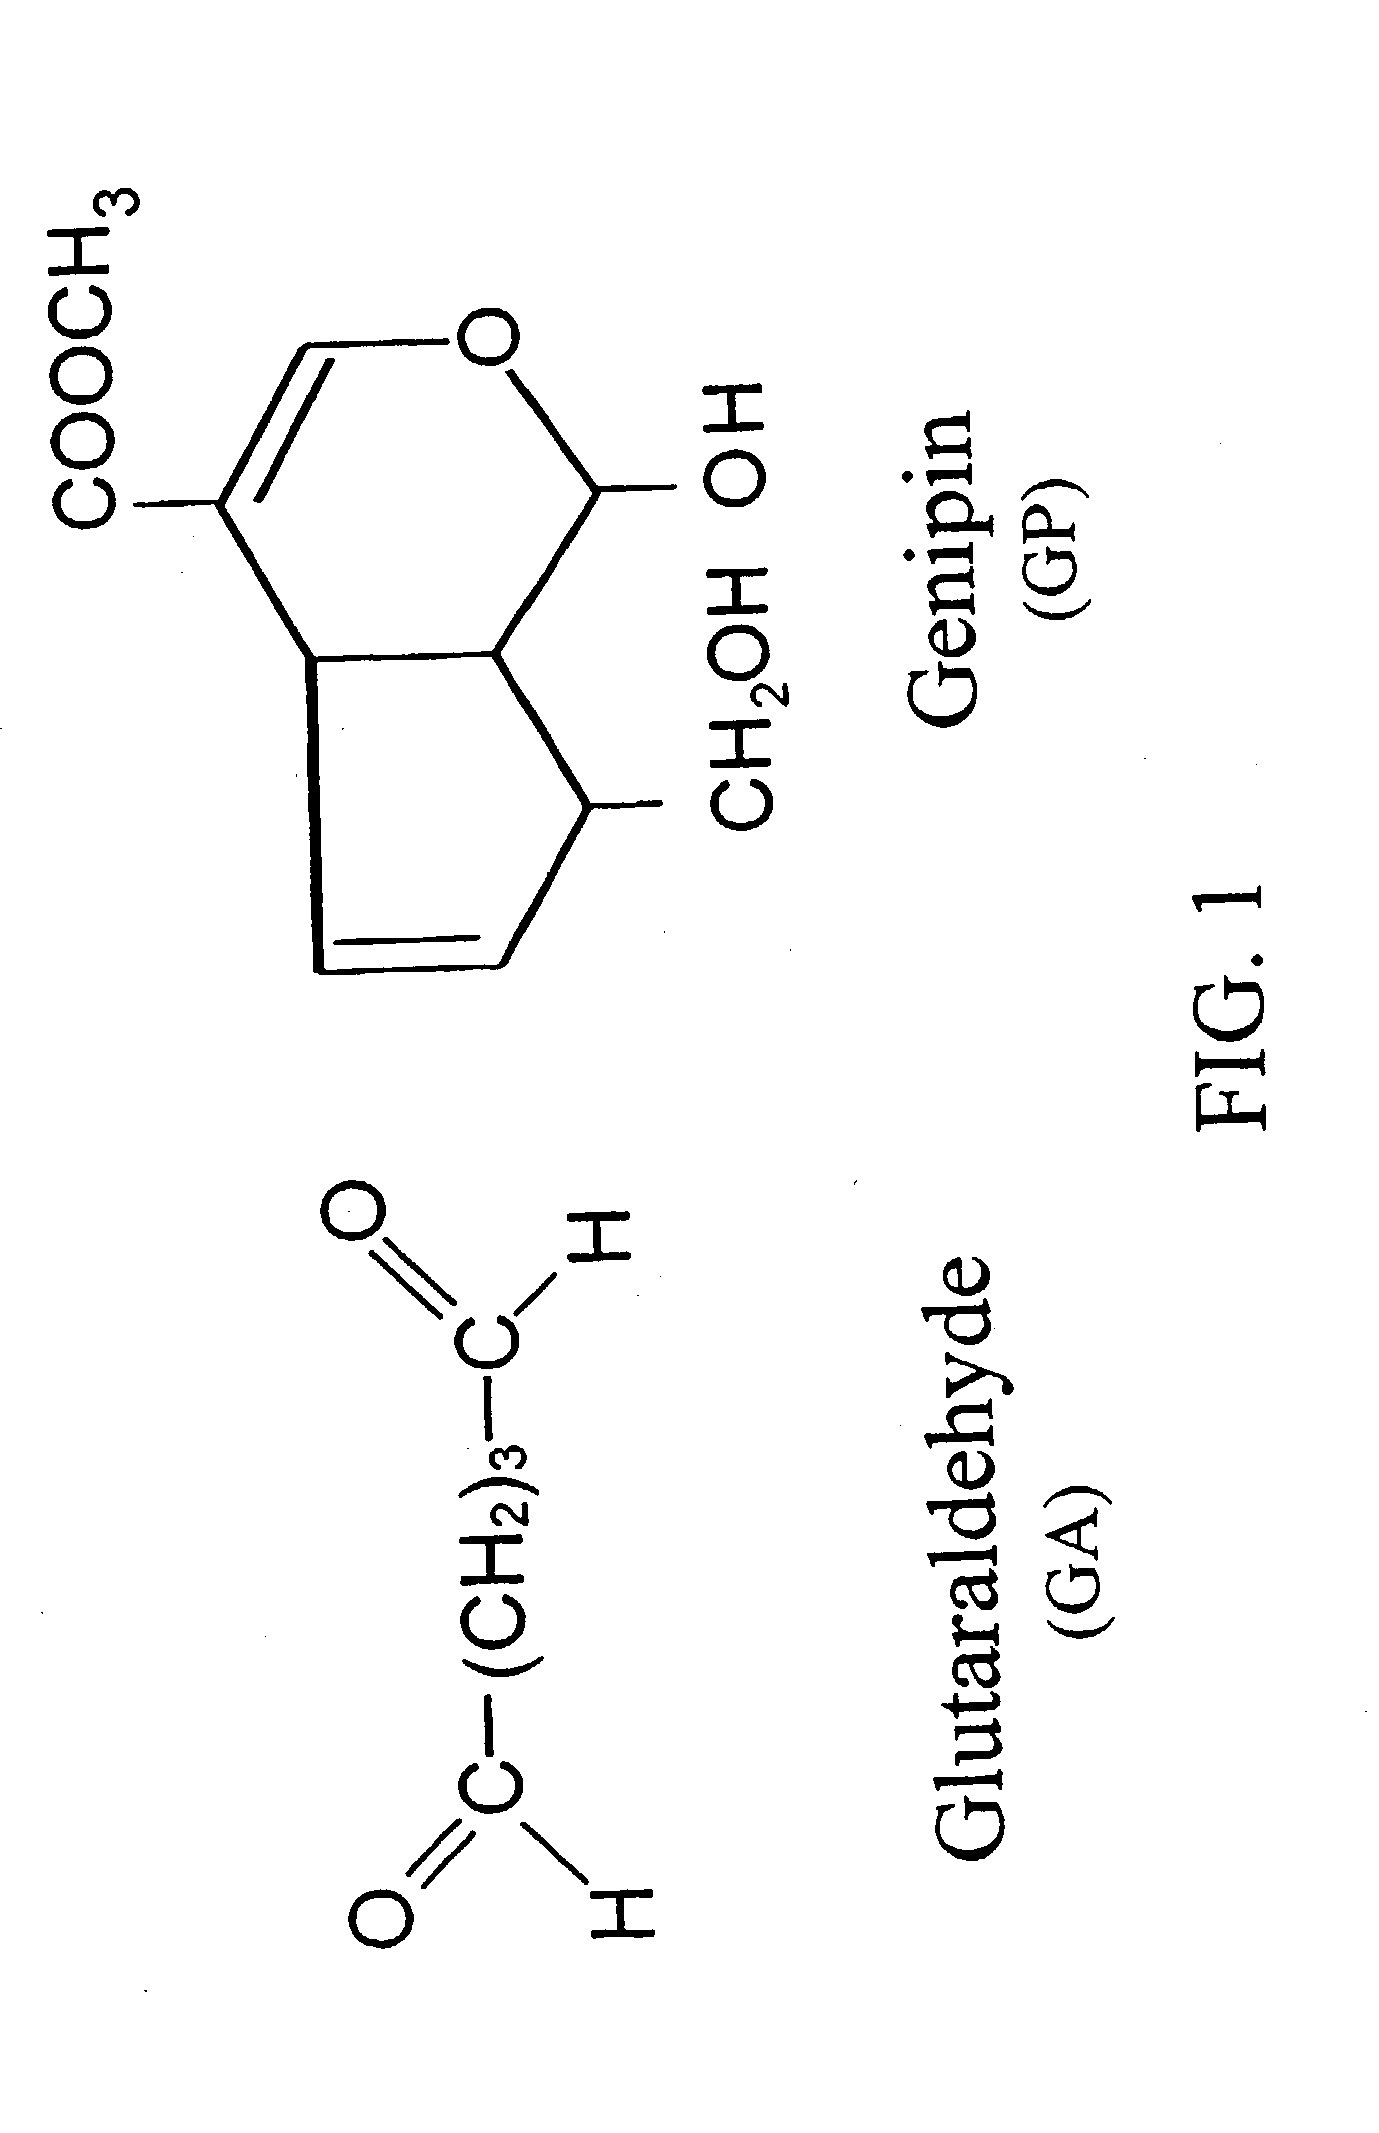 Drug-eluting device chemically treated with genipin